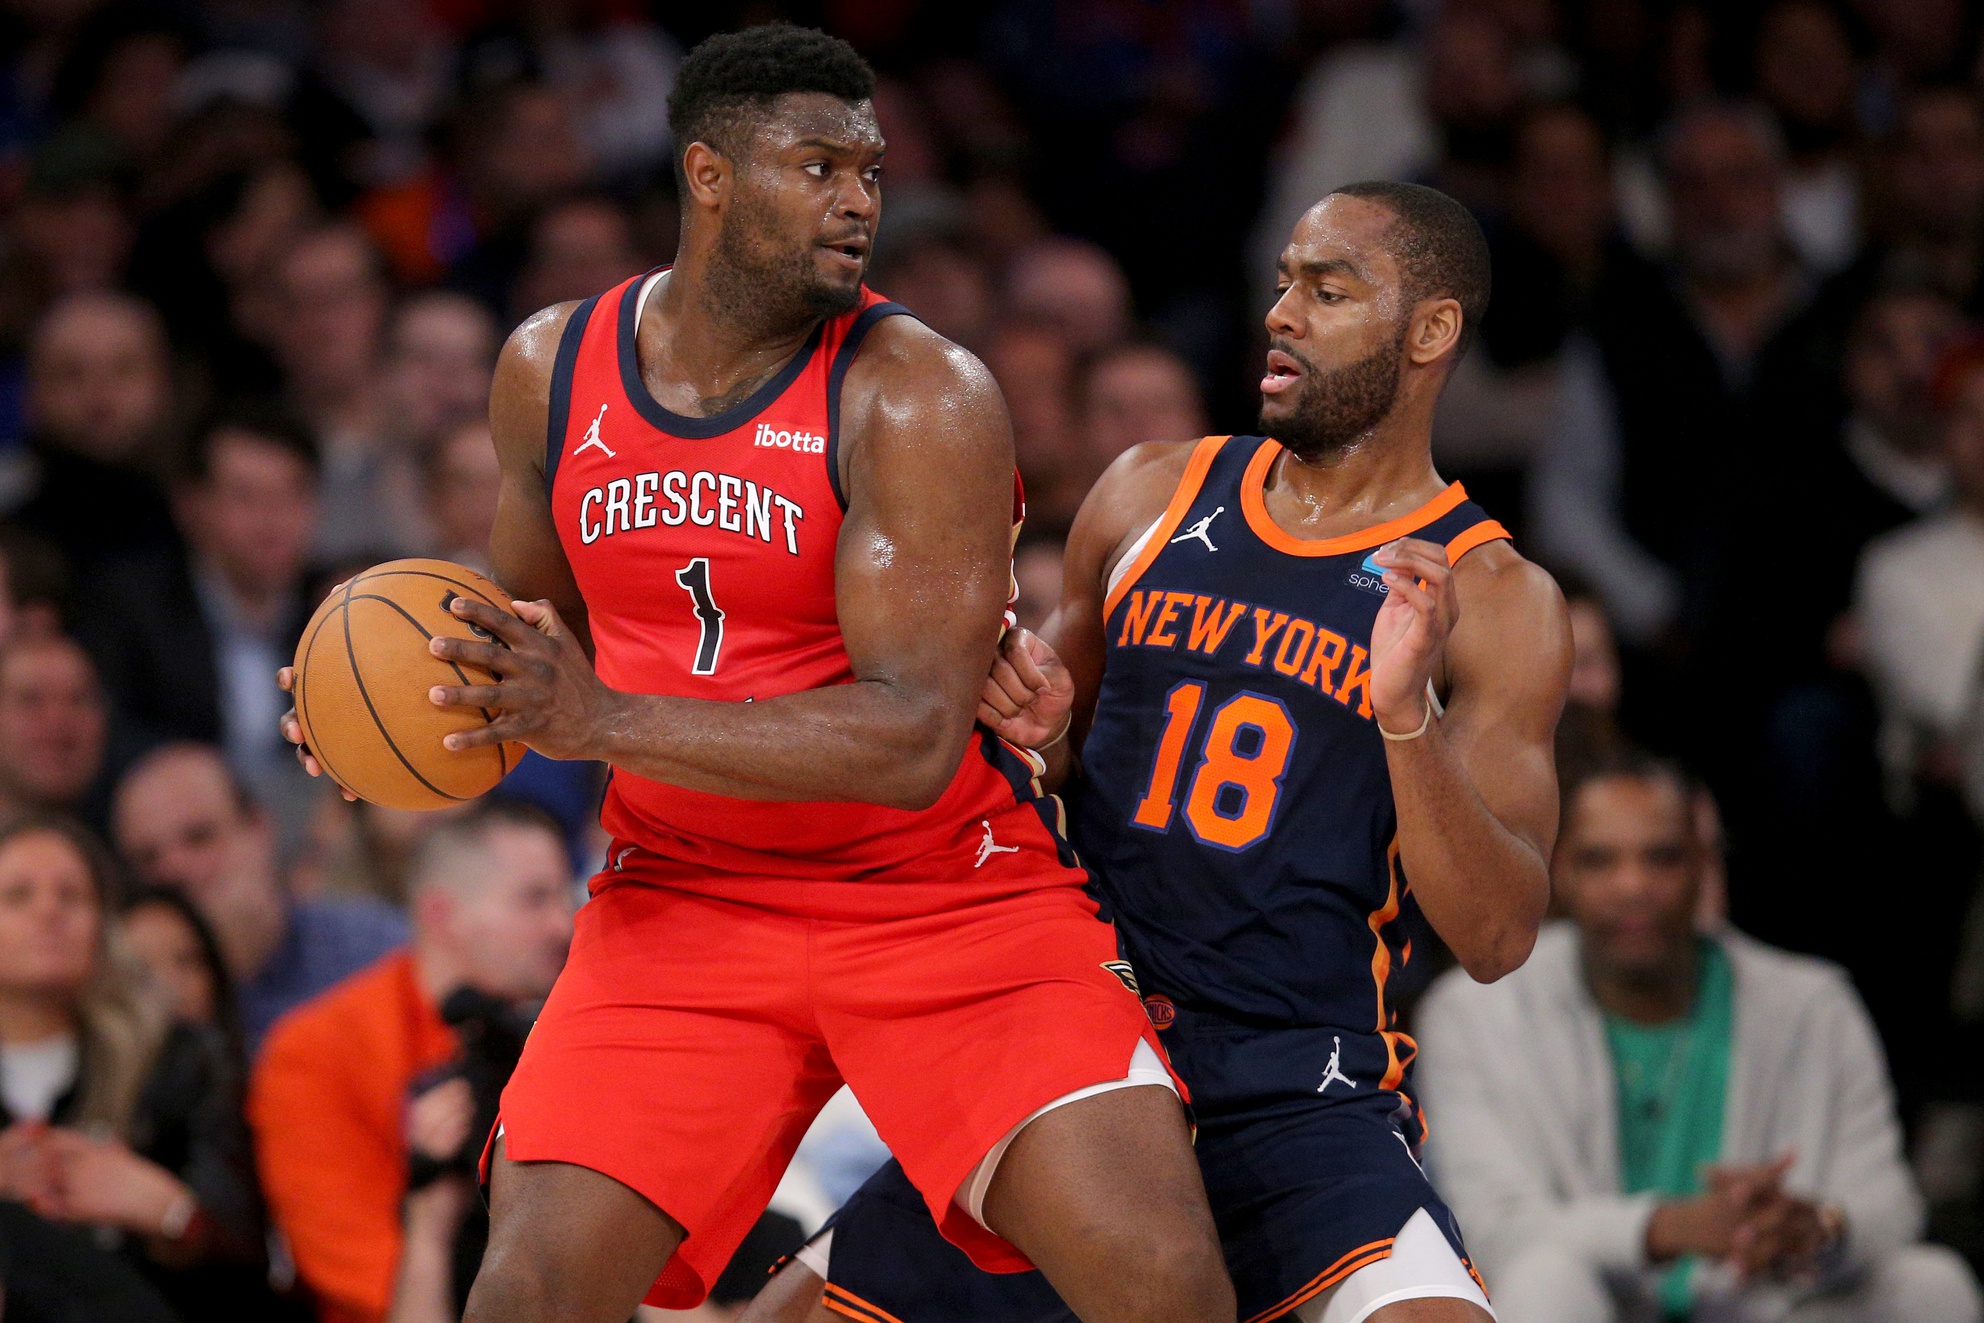 New Orleans Pelicans forward Zion Williamson (1) controls the ball against New York Knicks guard Alec Burks (18) during the second quarter at Madison Square Garden.